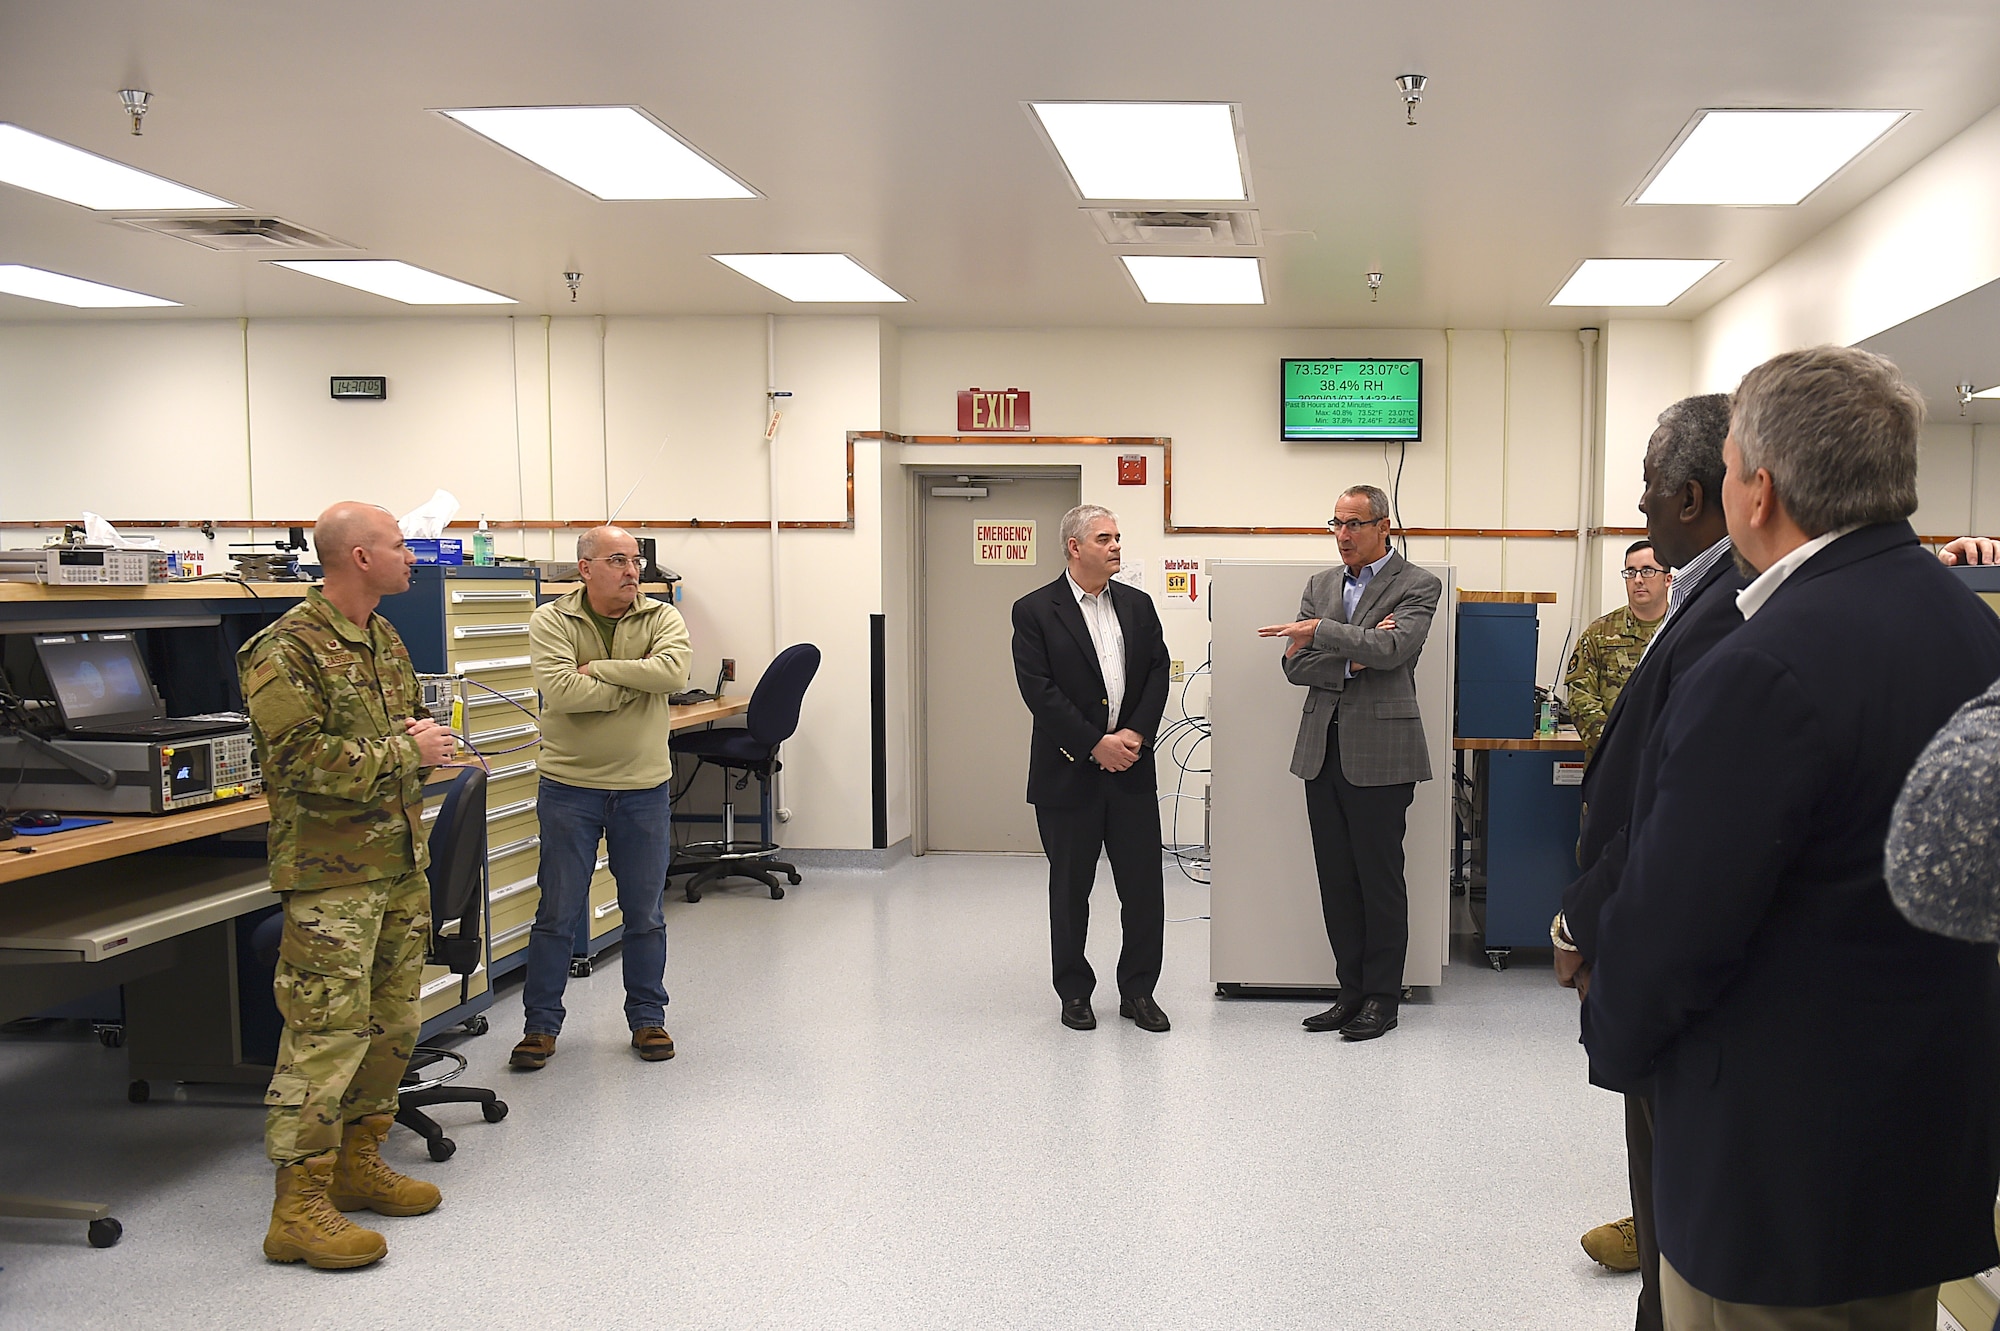 Col. Eliot Sasson, 62nd Maintenance Group commander, far left, speaks with members of the National Commission on Military Aviation Safety (NCMAS) inside the precision equipment measurement lab on Joint Base Lewis-McChord (JBLM), Wash., Jan. 7, 2020. While at JBLM, the NCMAS participated in discussion forums with base leadership, as well as junior enlisted from both McChord’s maintenance and operations units, to better understand their daily challenges and how to improve aviation safety and readiness.